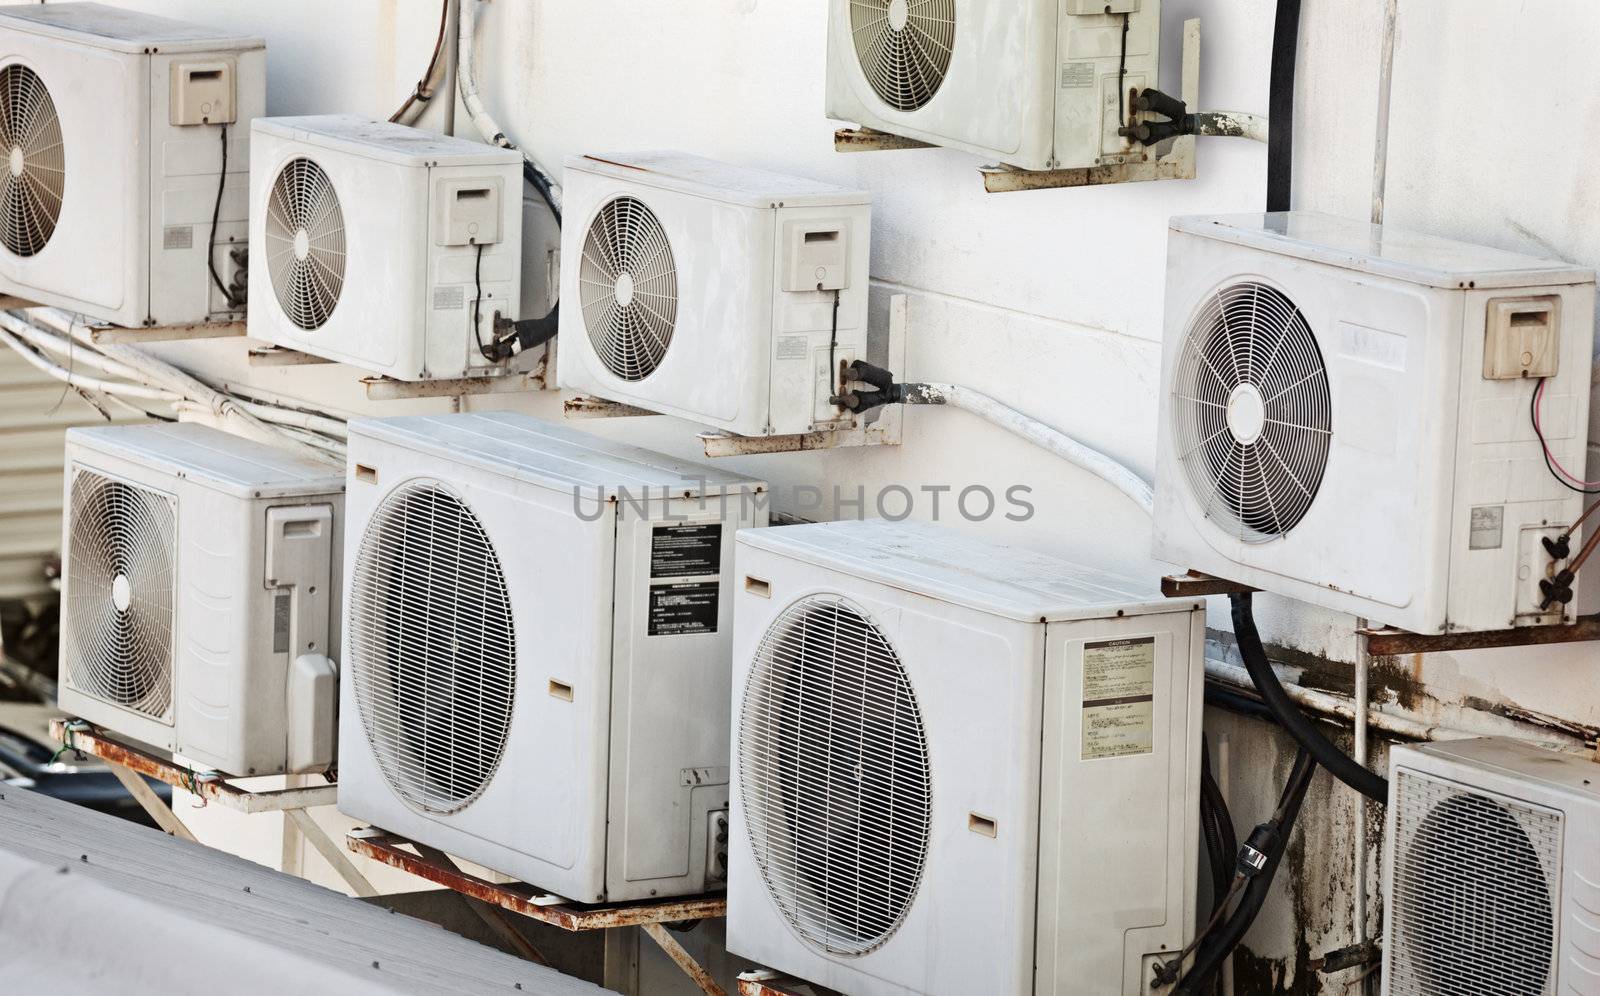 Many older air conditioners covered the entire wall